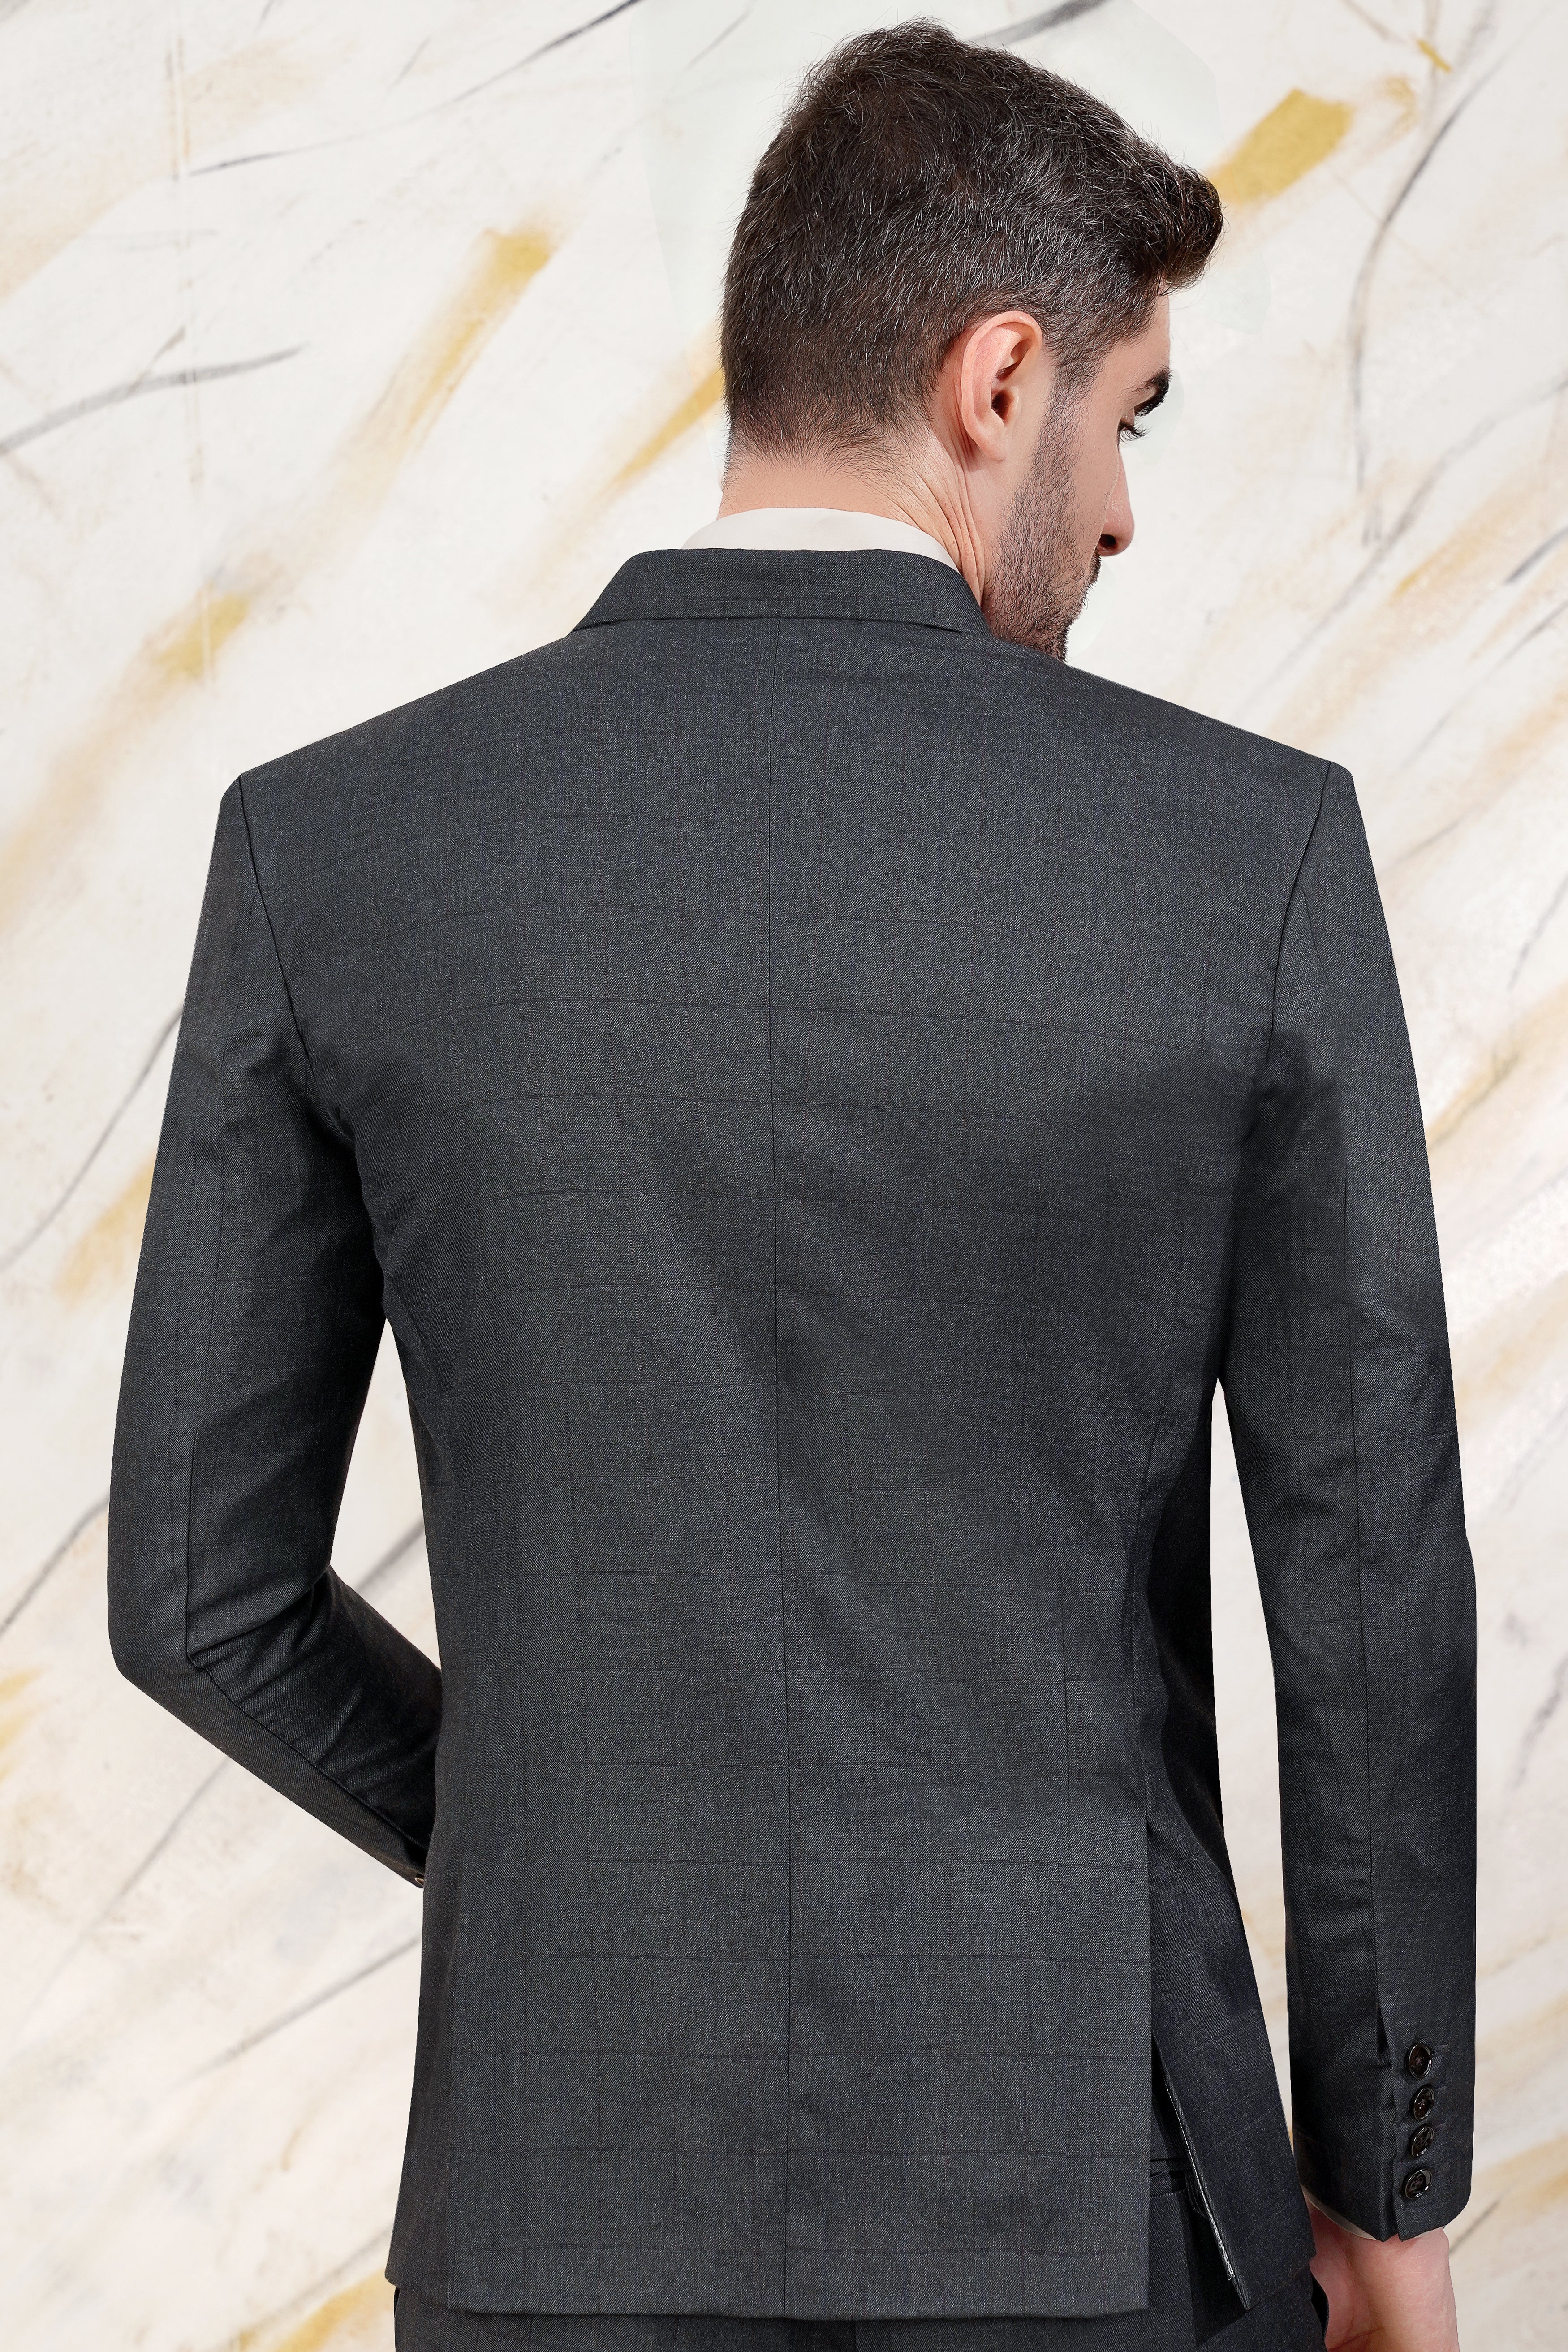 Arsenic Grey Wool Rich Double Breasted Blazer BL3072-DB-36, BL3072-DB-38, BL3072-DB-40, BL3072-DB-42, BL3072-DB-44, BL3072-DB-46, BL3072-DB-48, BL3072-DB-50, BL3072-DB-52, BL3072-DB-54, BL3072-DB-56, BL3072-DB-58, BL3072-DB-60